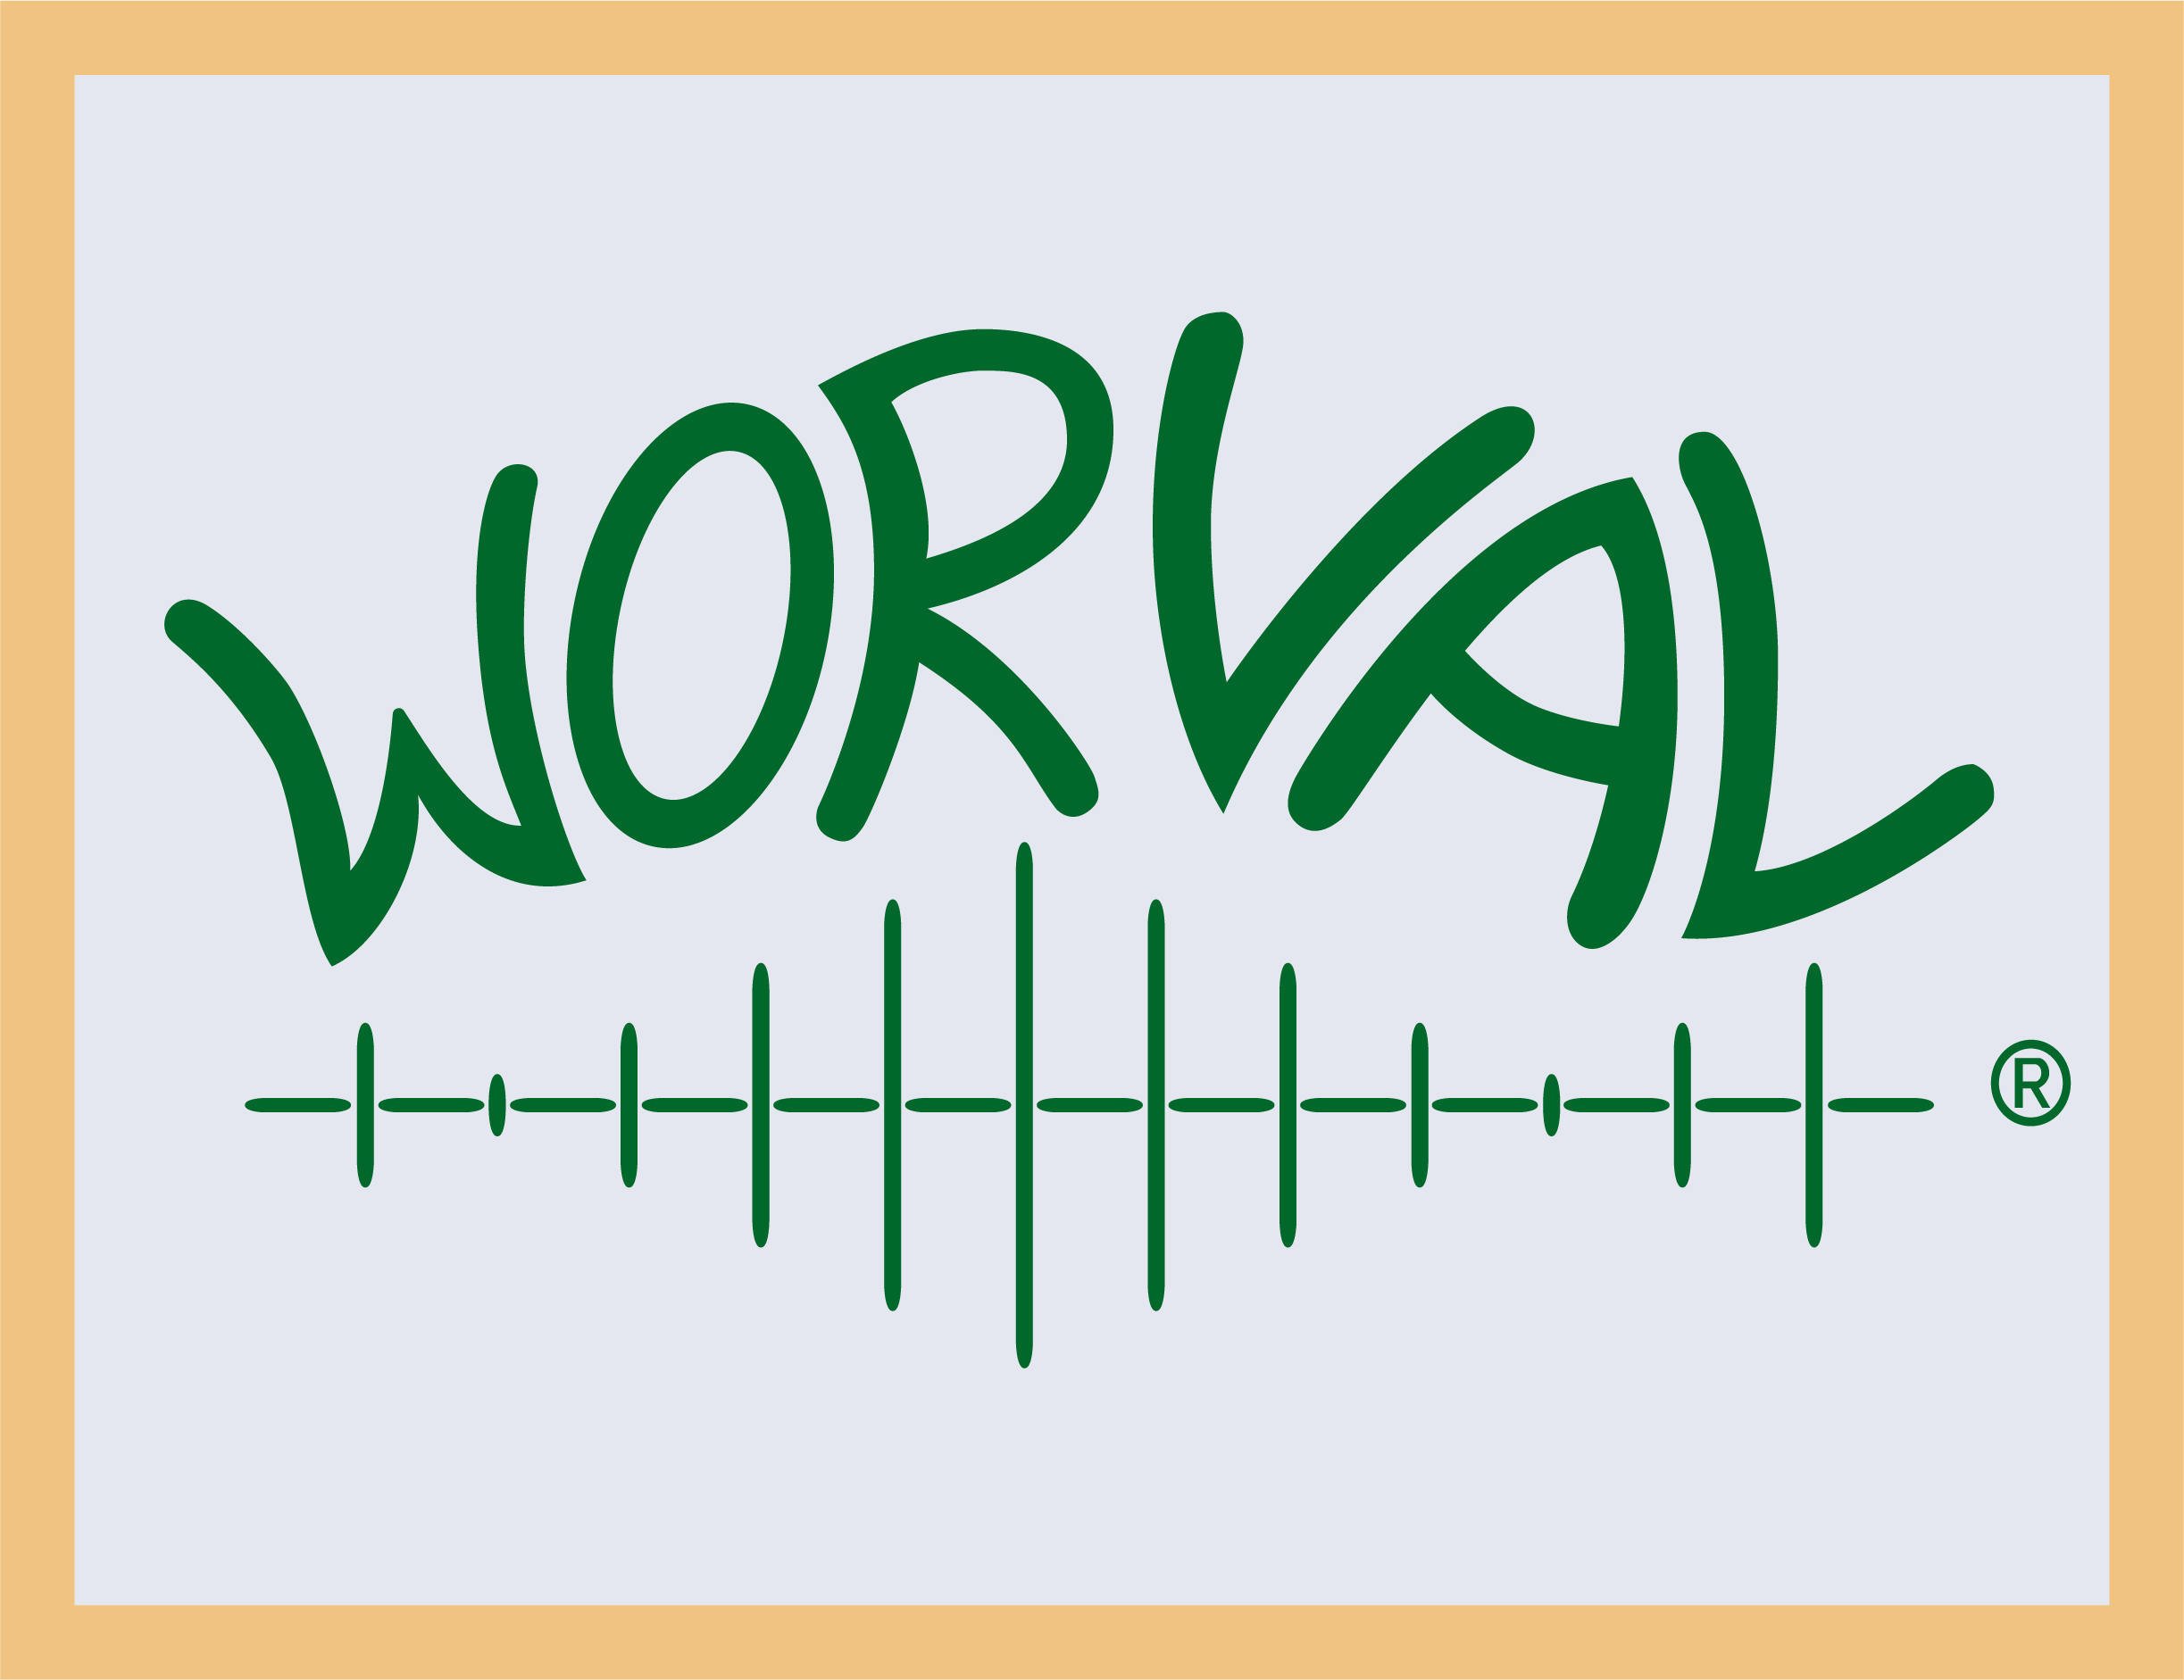 Logo of WORVAL - the research product that is the 'salesforce productivity diagnoser'